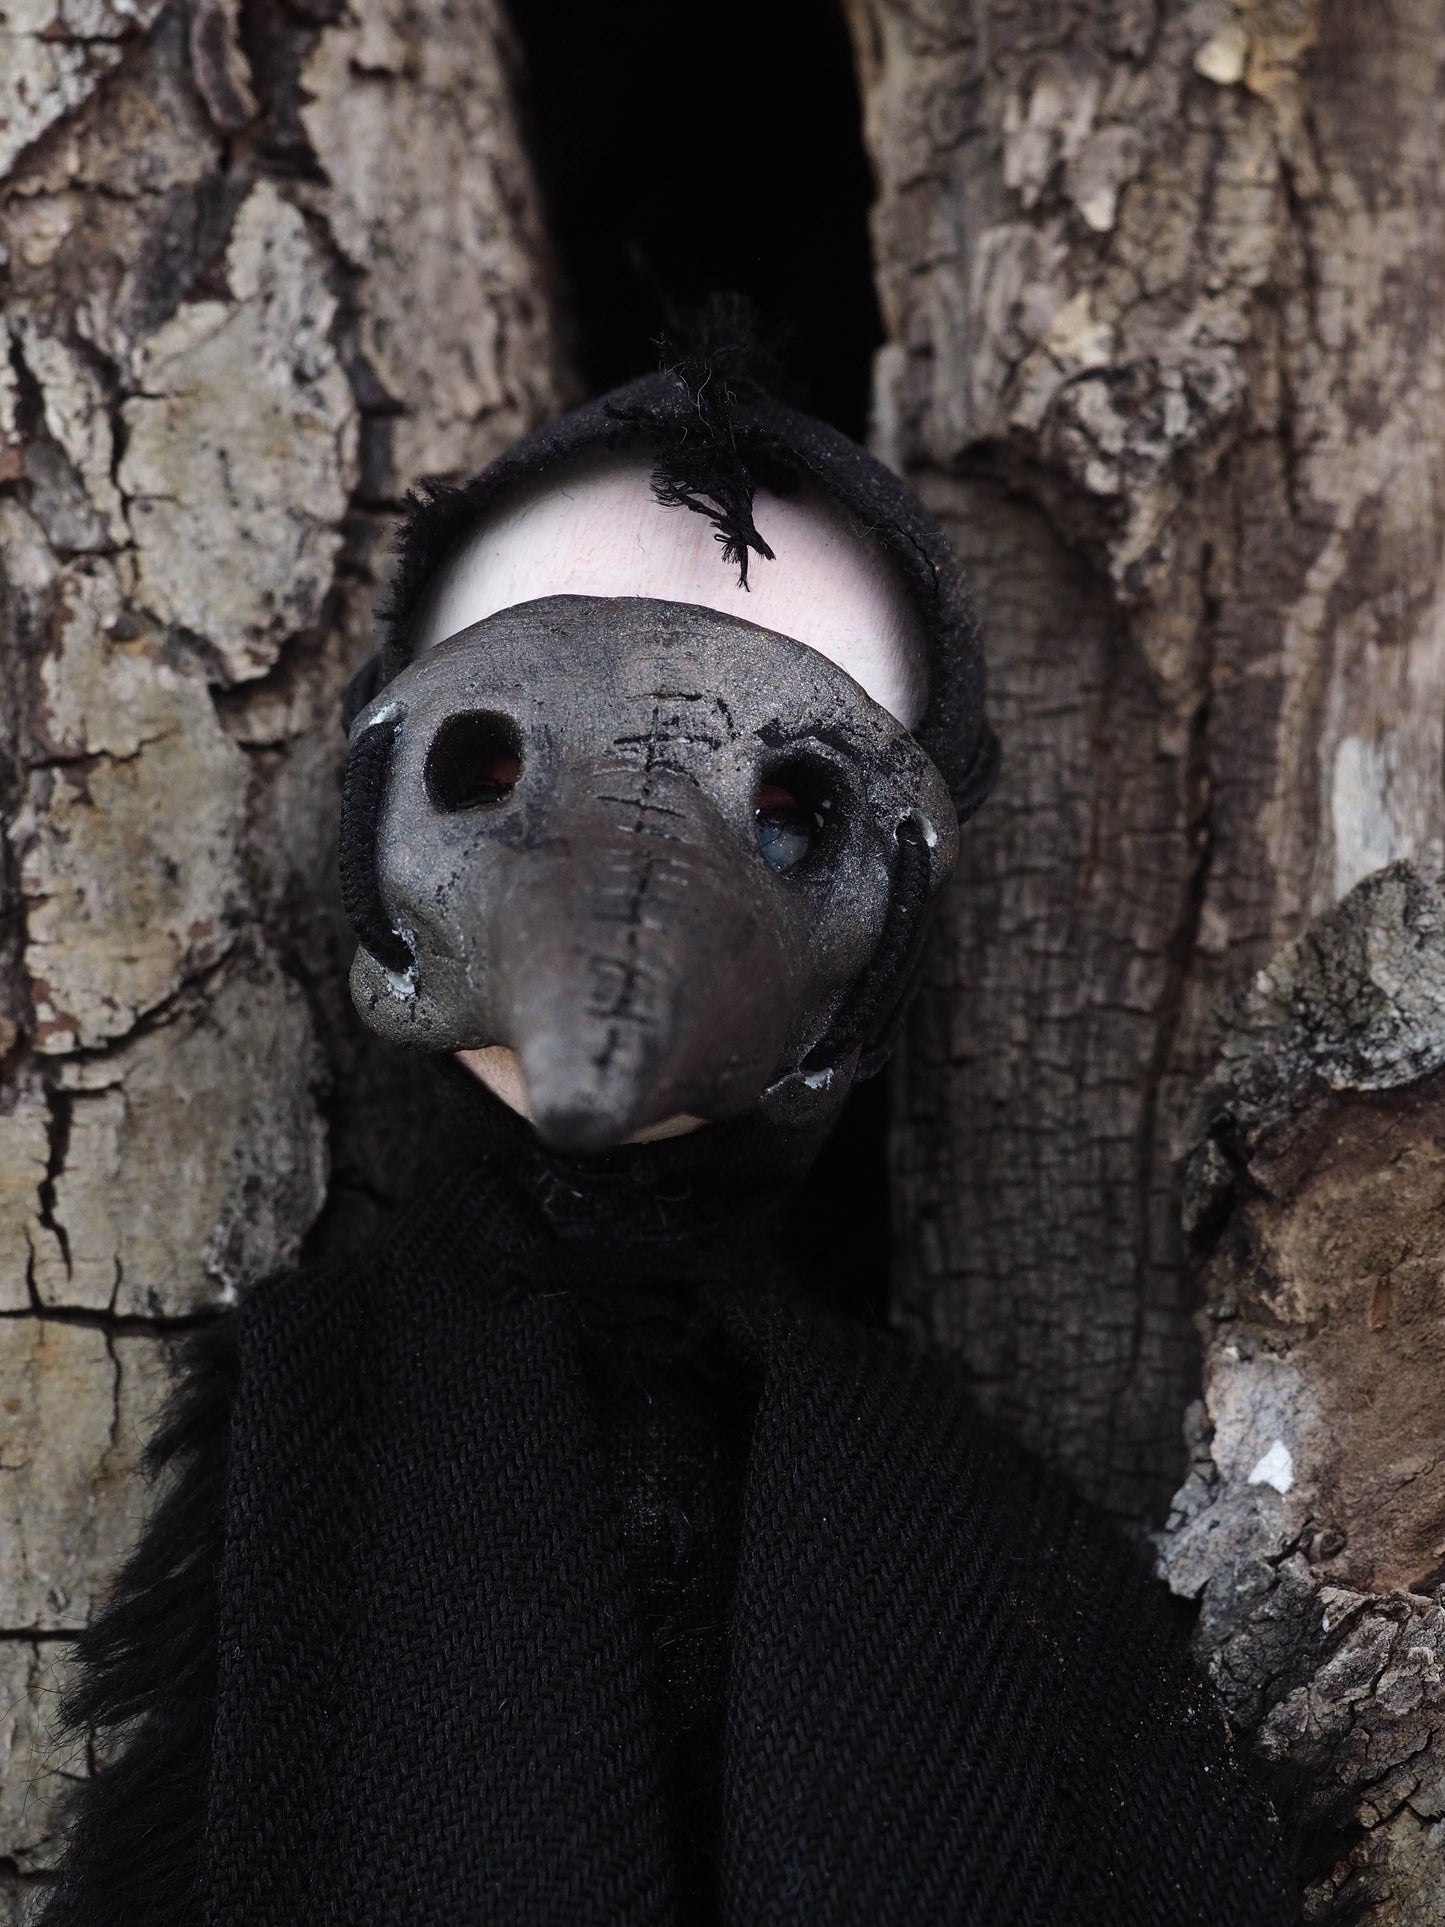 THE PLAGUE DOCTOR is a handmade Halloween art doll created by Danita Art. Using air dried clay, found fabrics and needle stitching for her body, Danita created an amazing original piece of work.